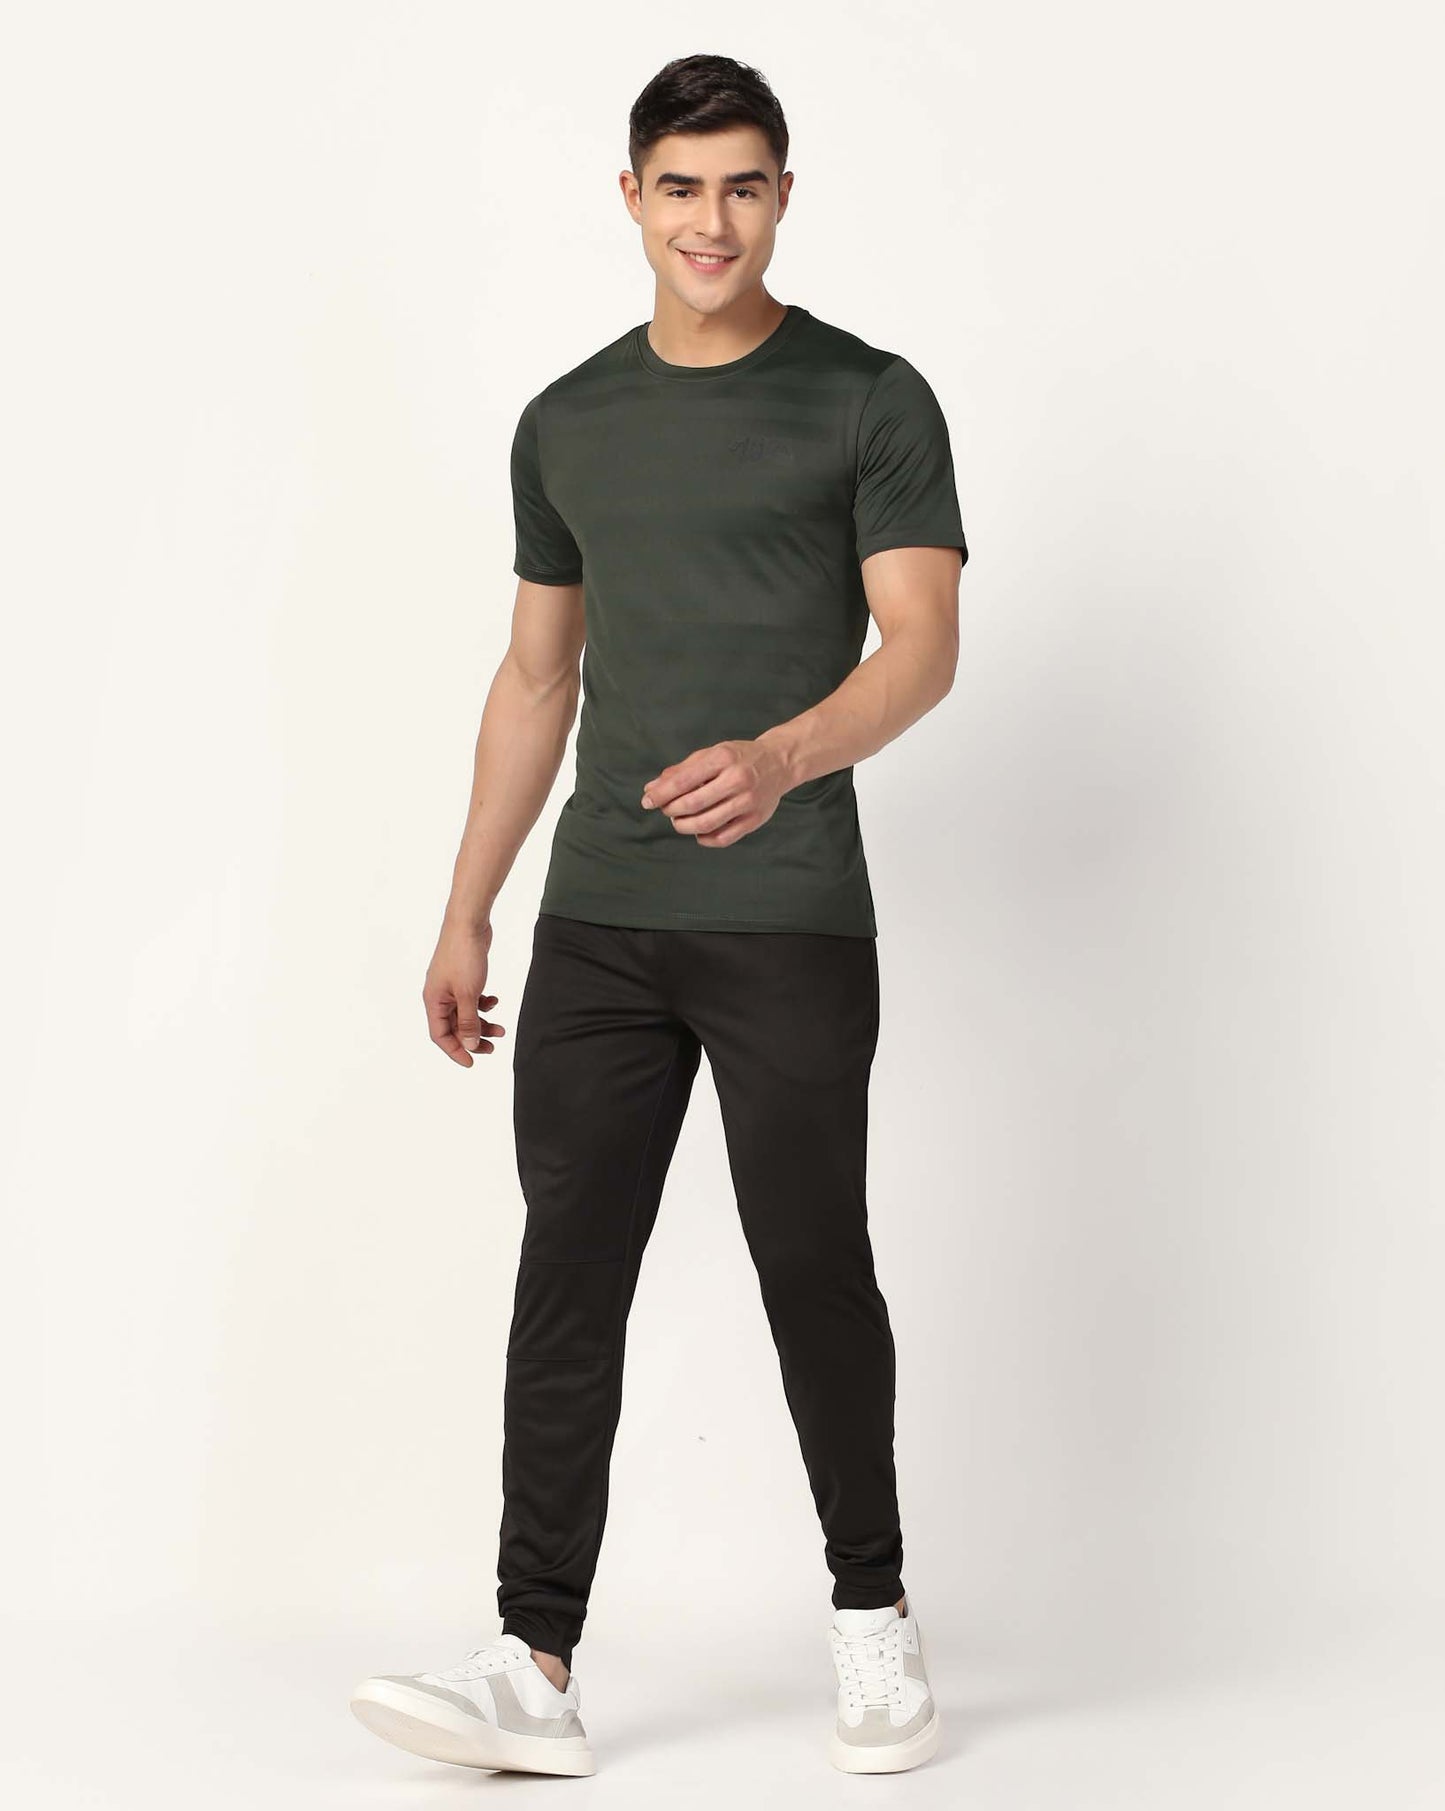 Men's Training Polyester Tee - Olive